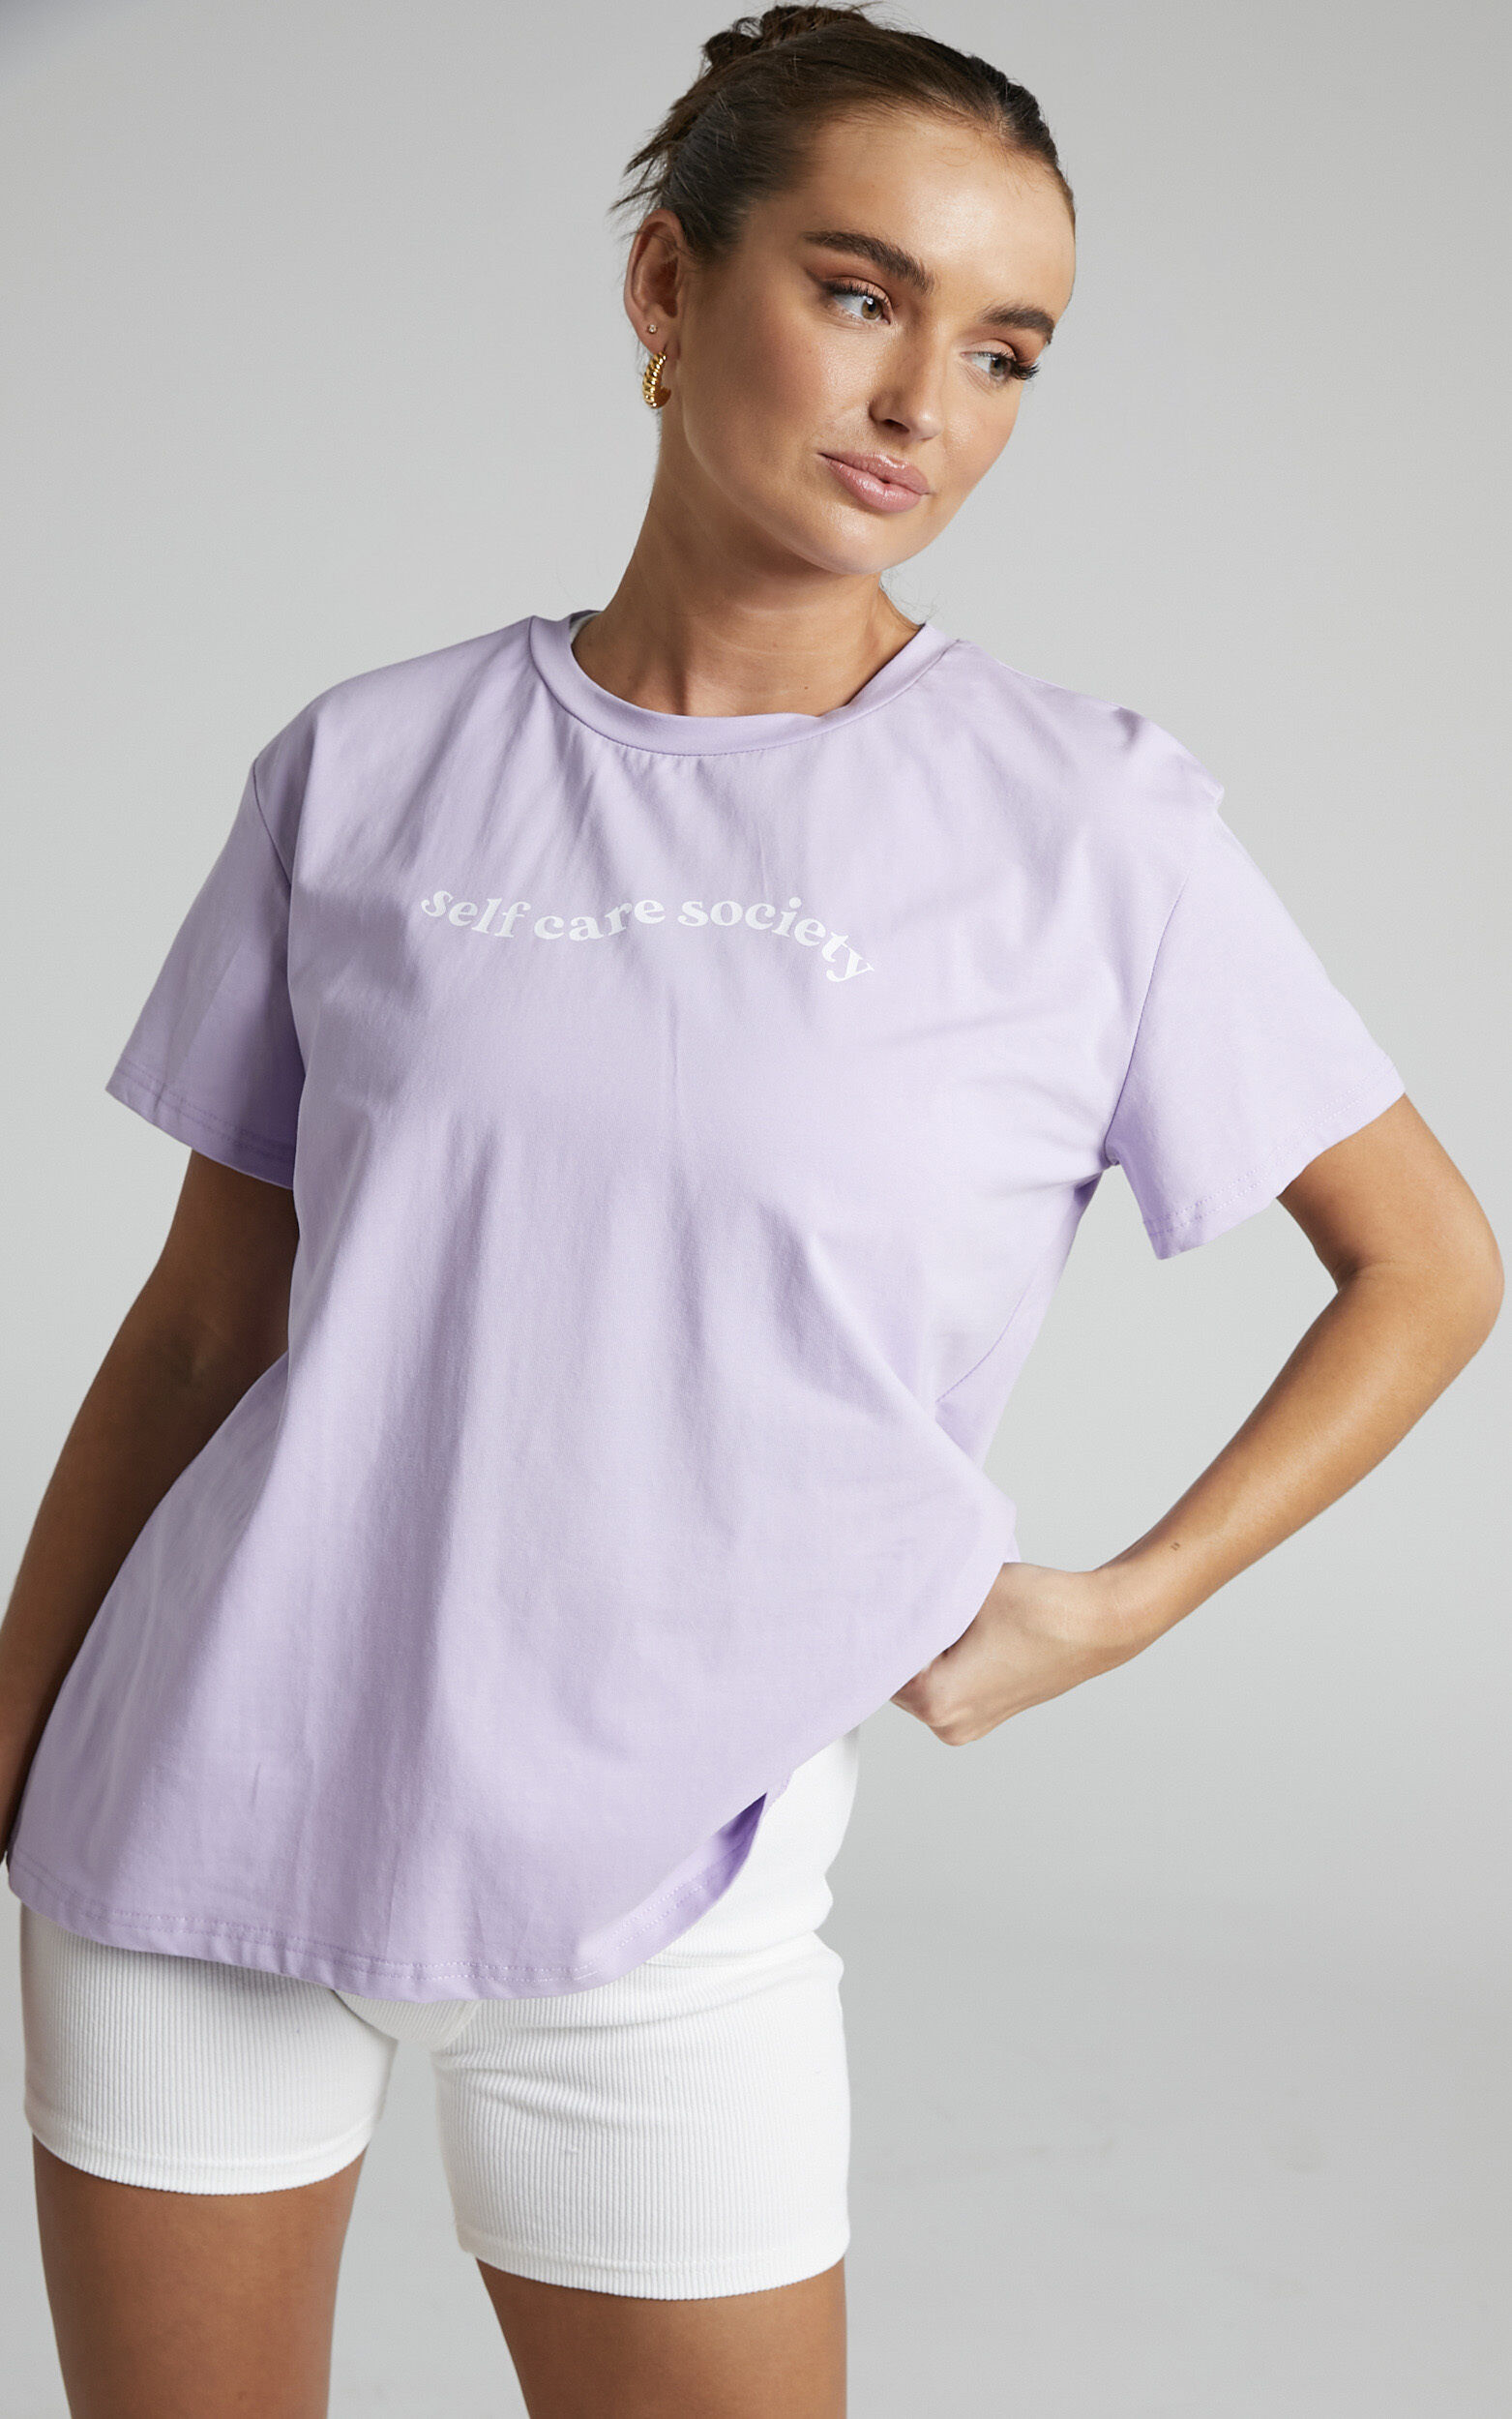 Sunday Society Club - Self Care Society T Shirt in Lilac - 04, PRP2, super-hi-res image number null